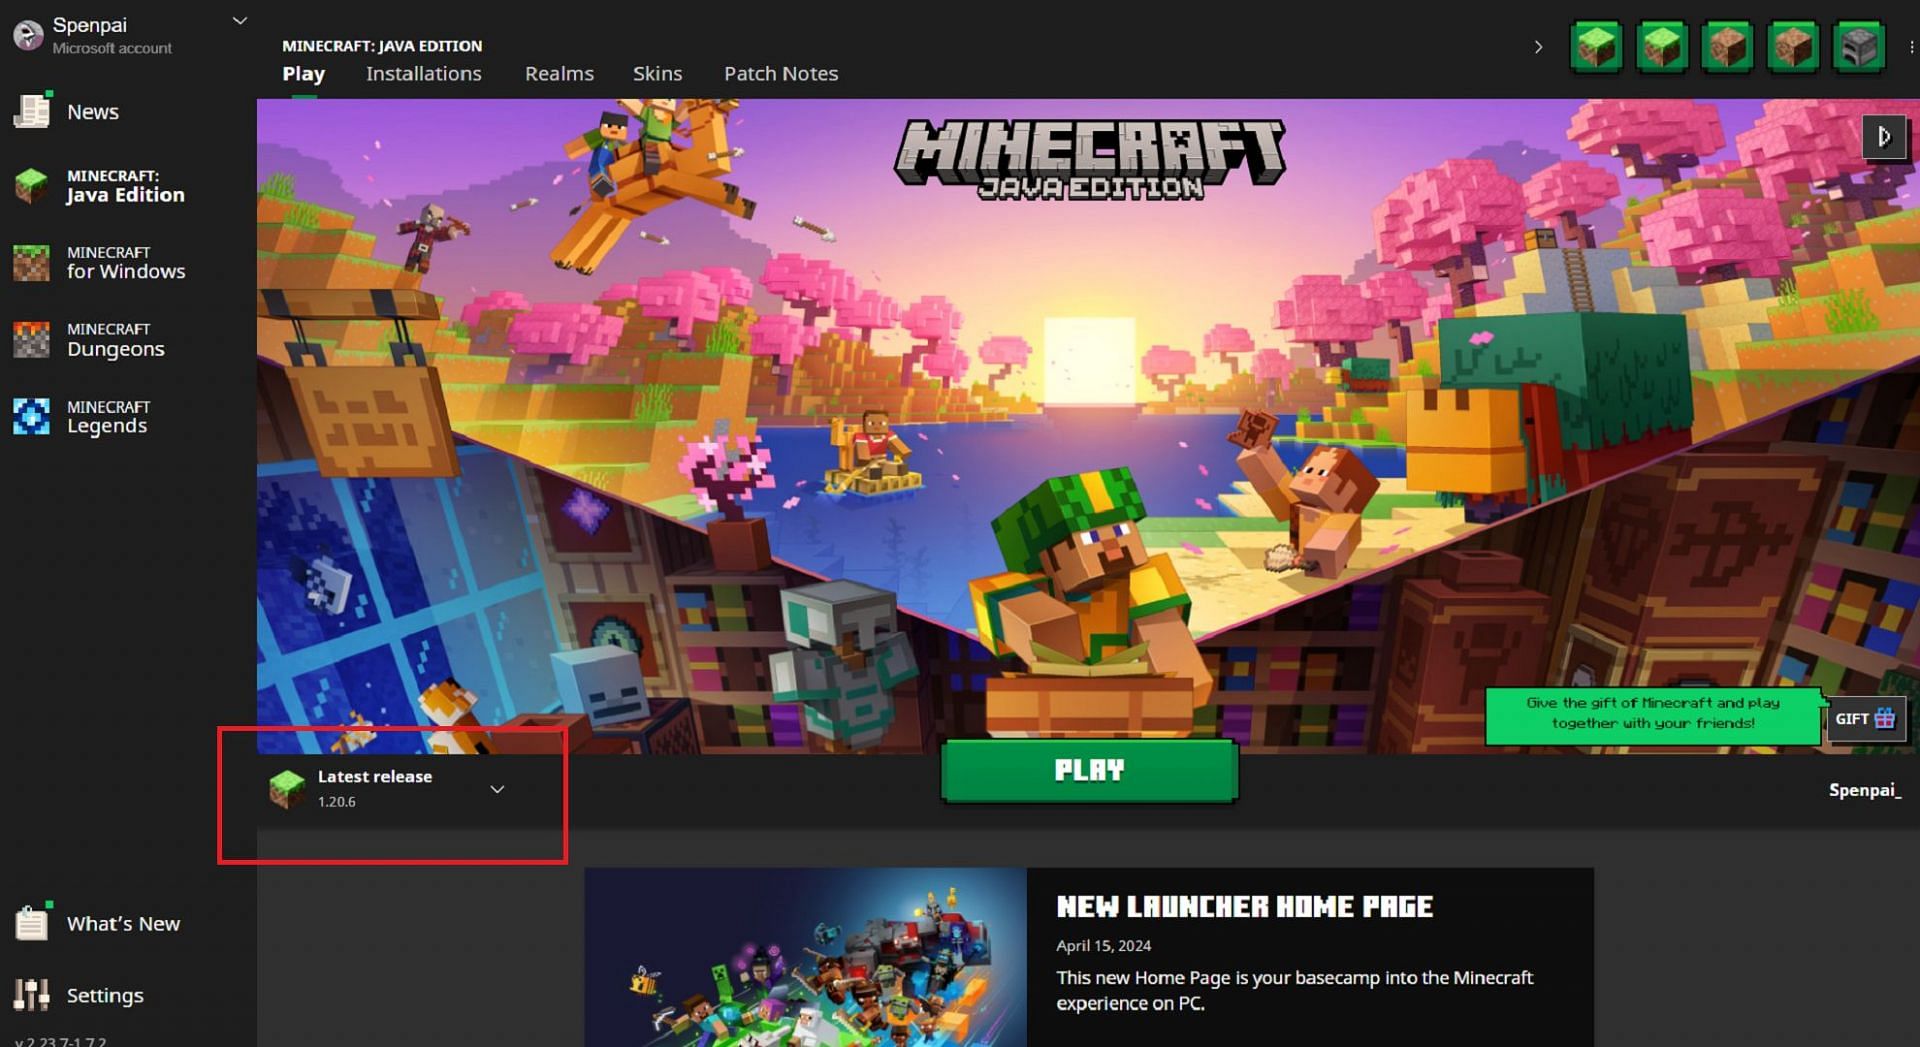 The Minecraft Launcher client allows for quick and easy updating to Java 1.20.6 (Image via Mojang)